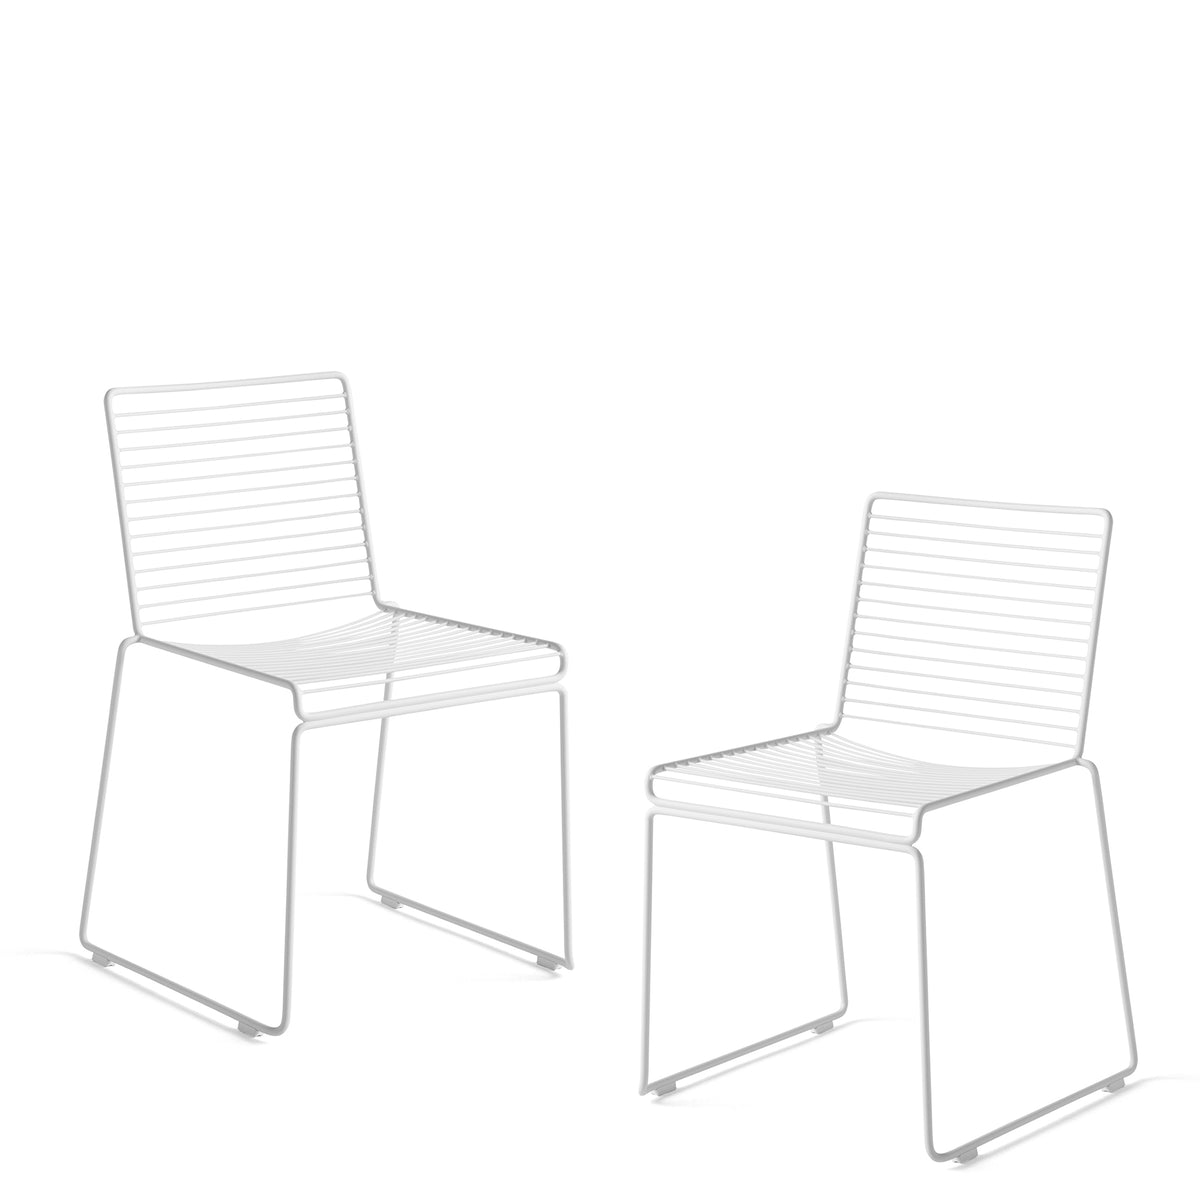 HAY - Hee Dining Chair - Pair - Pair of White Chairs